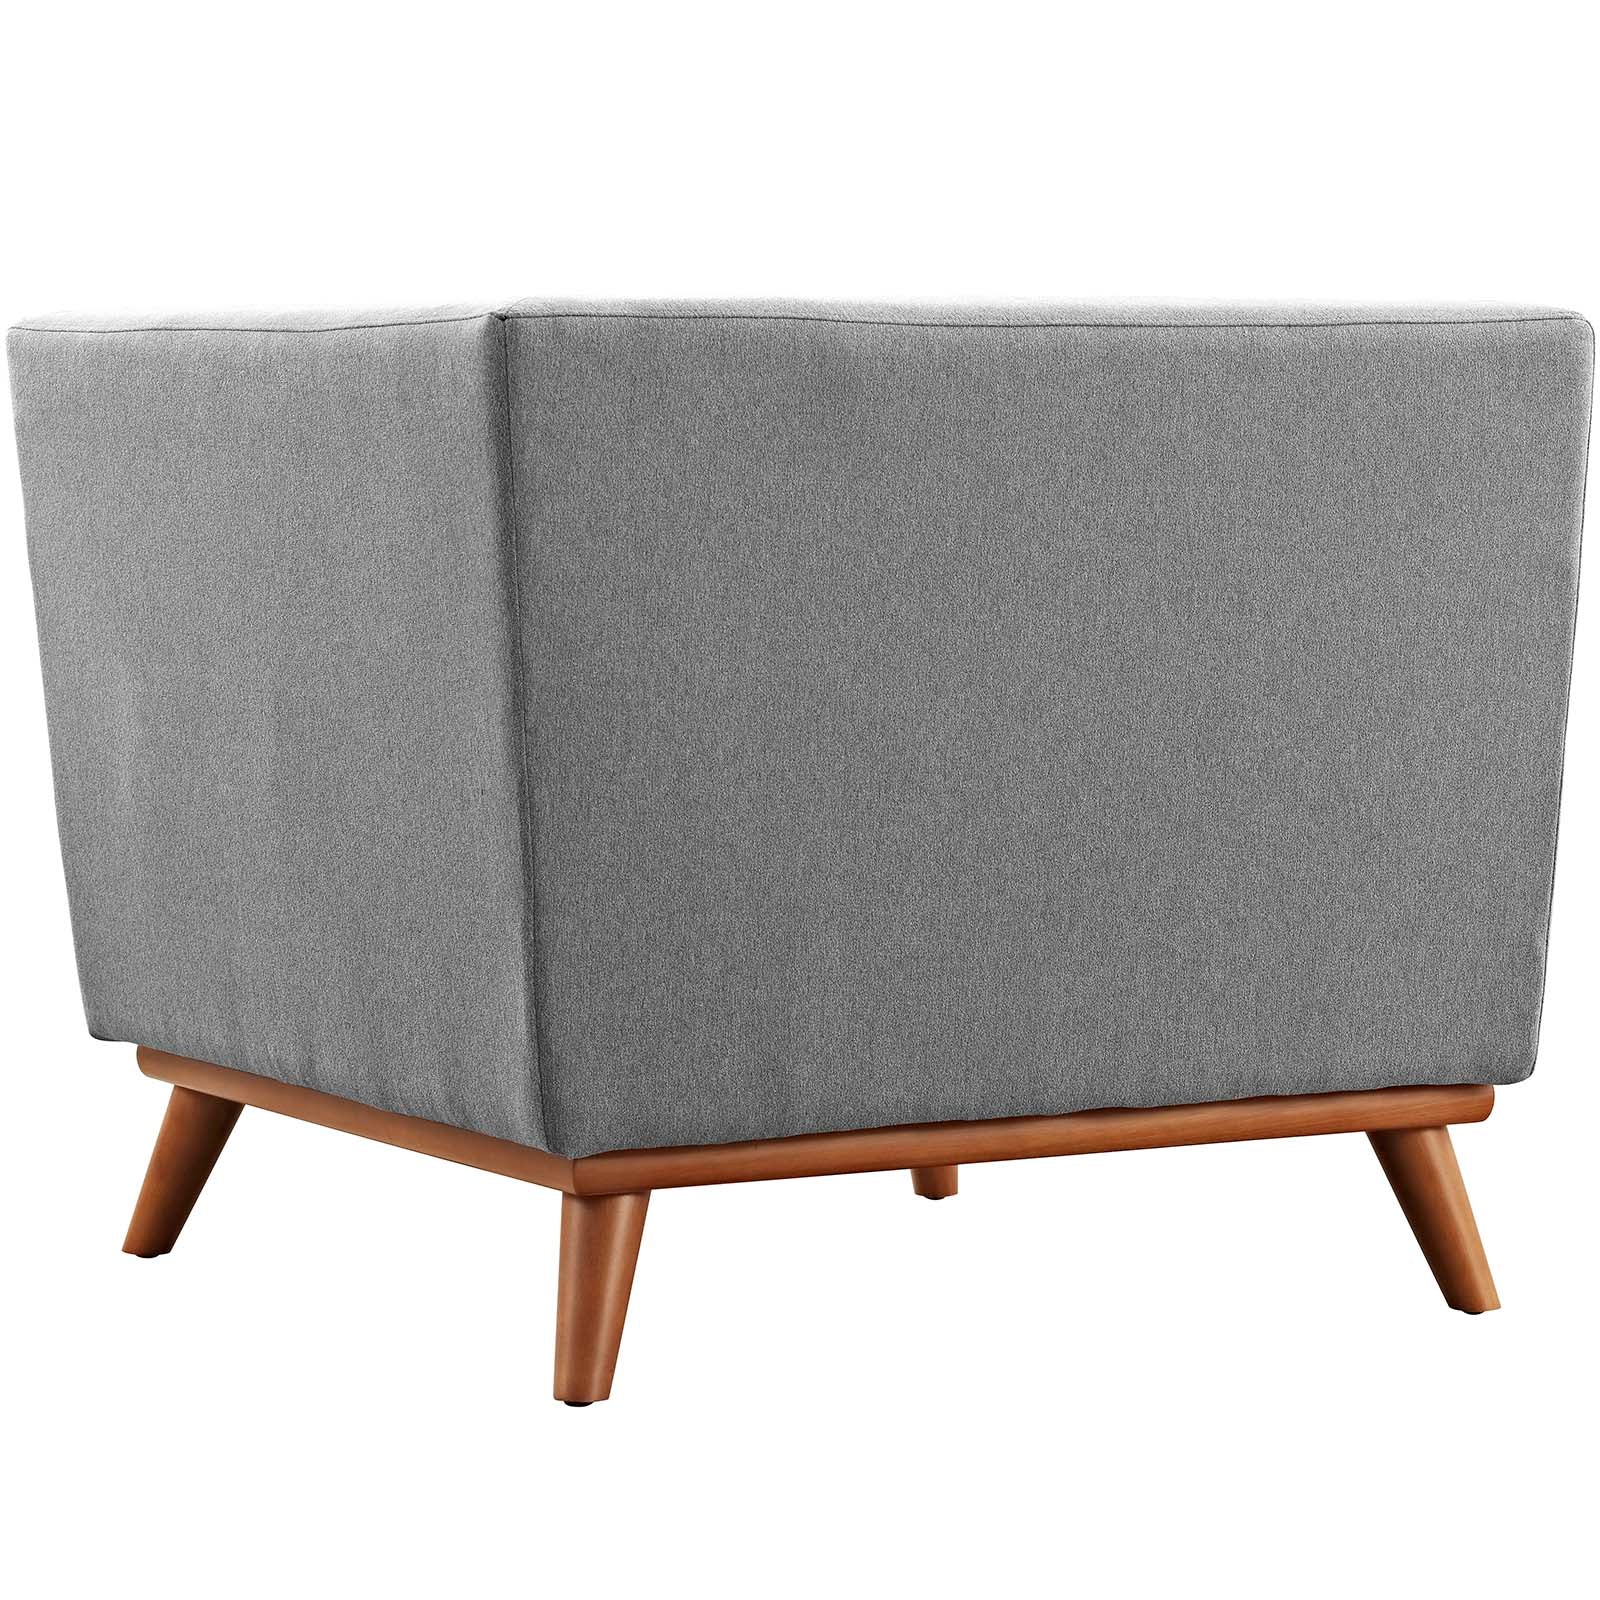 Engage Upholstered Fabric Corner Chair